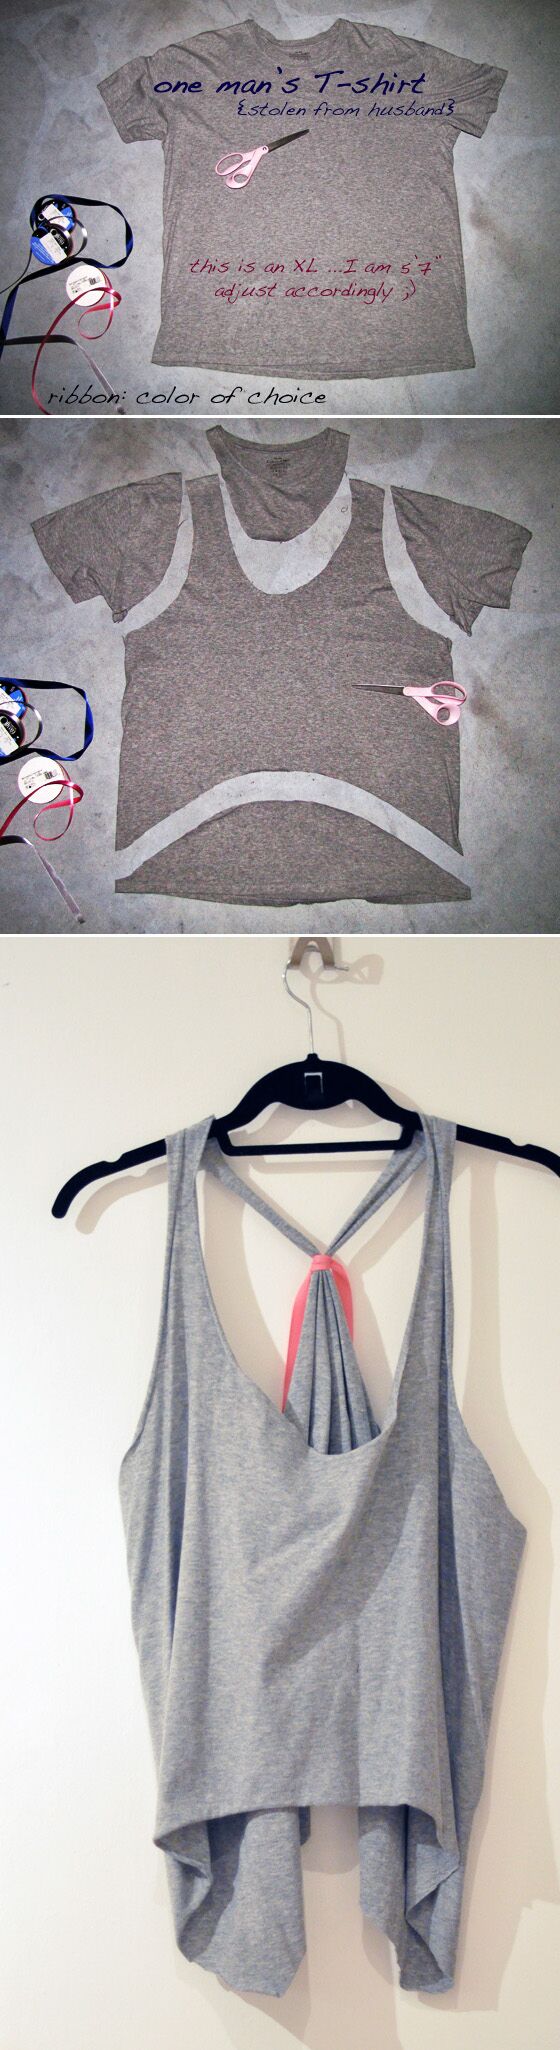 Tie-Back Tank Top - Diy clothes refashion for women